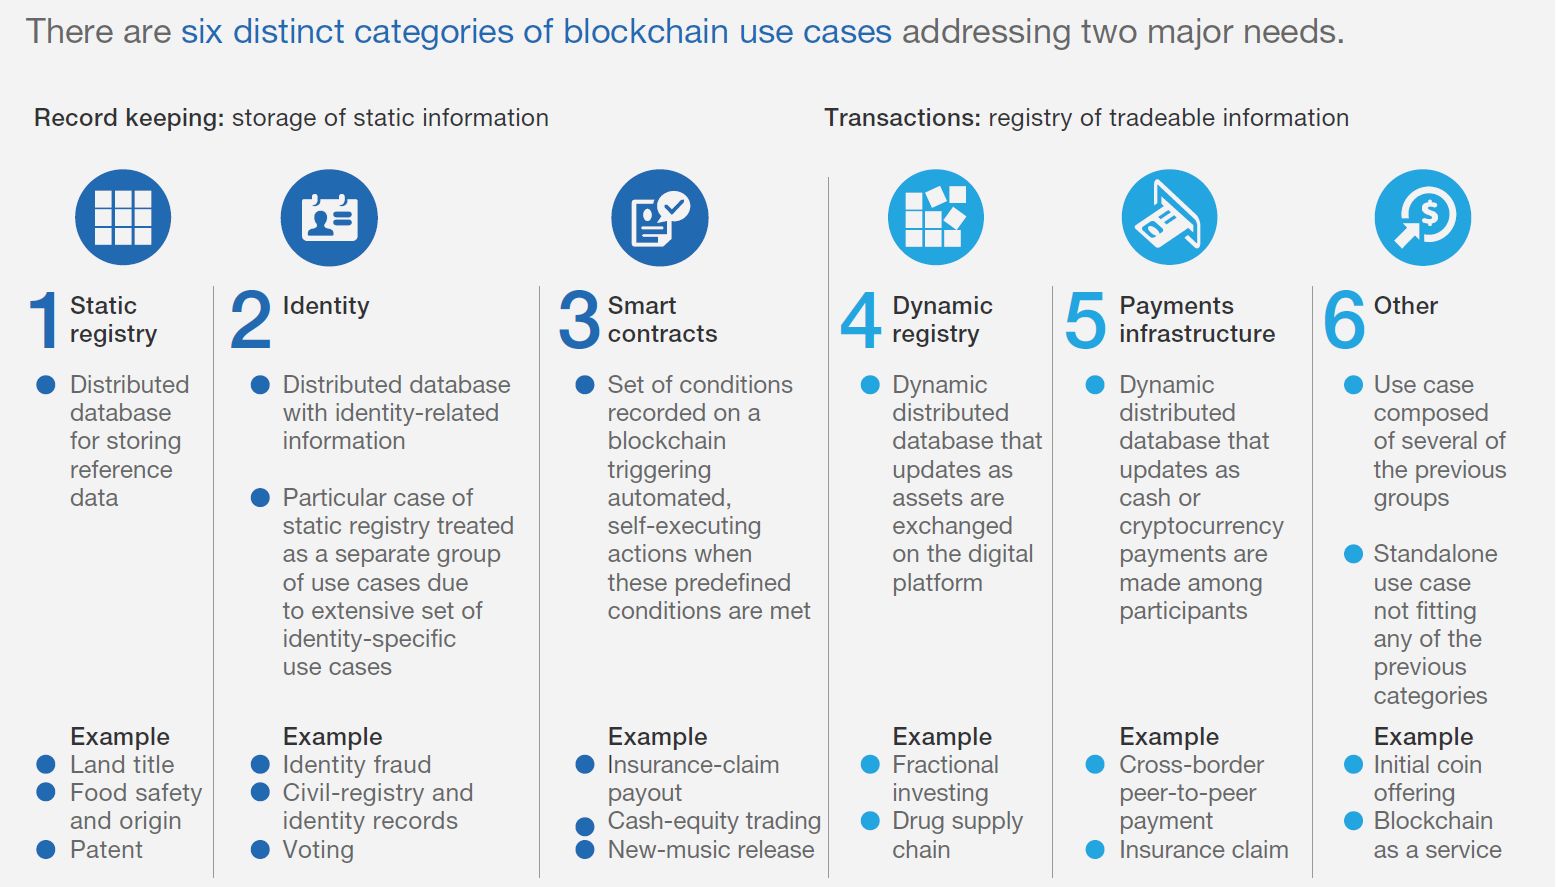 6 categories of blockchain use cases